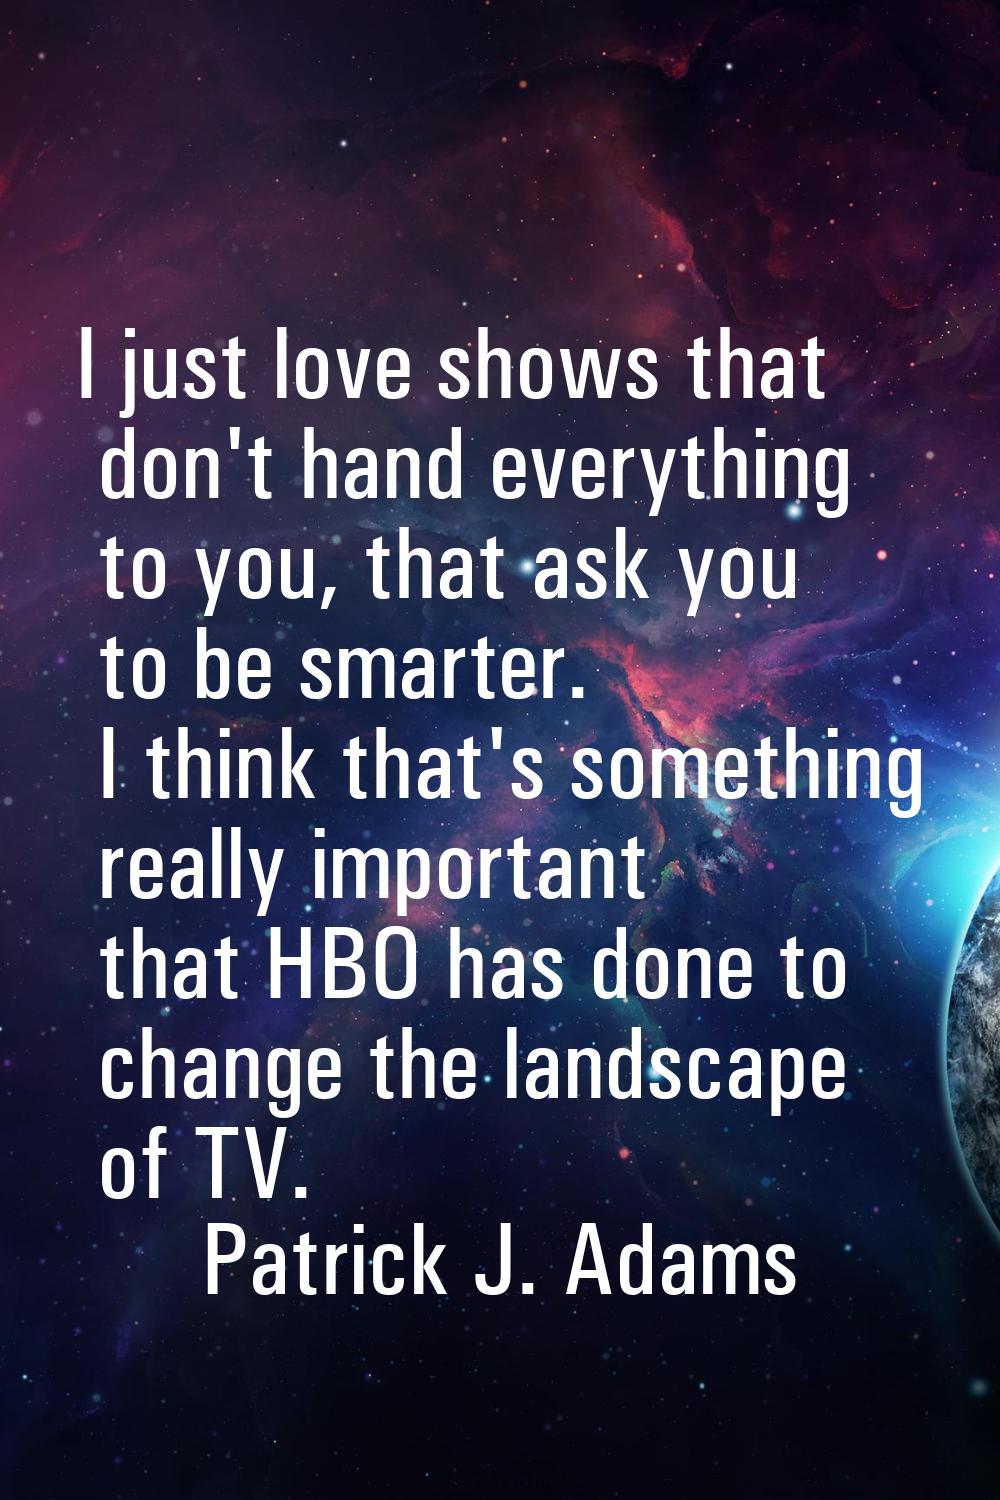 I just love shows that don't hand everything to you, that ask you to be smarter. I think that's som